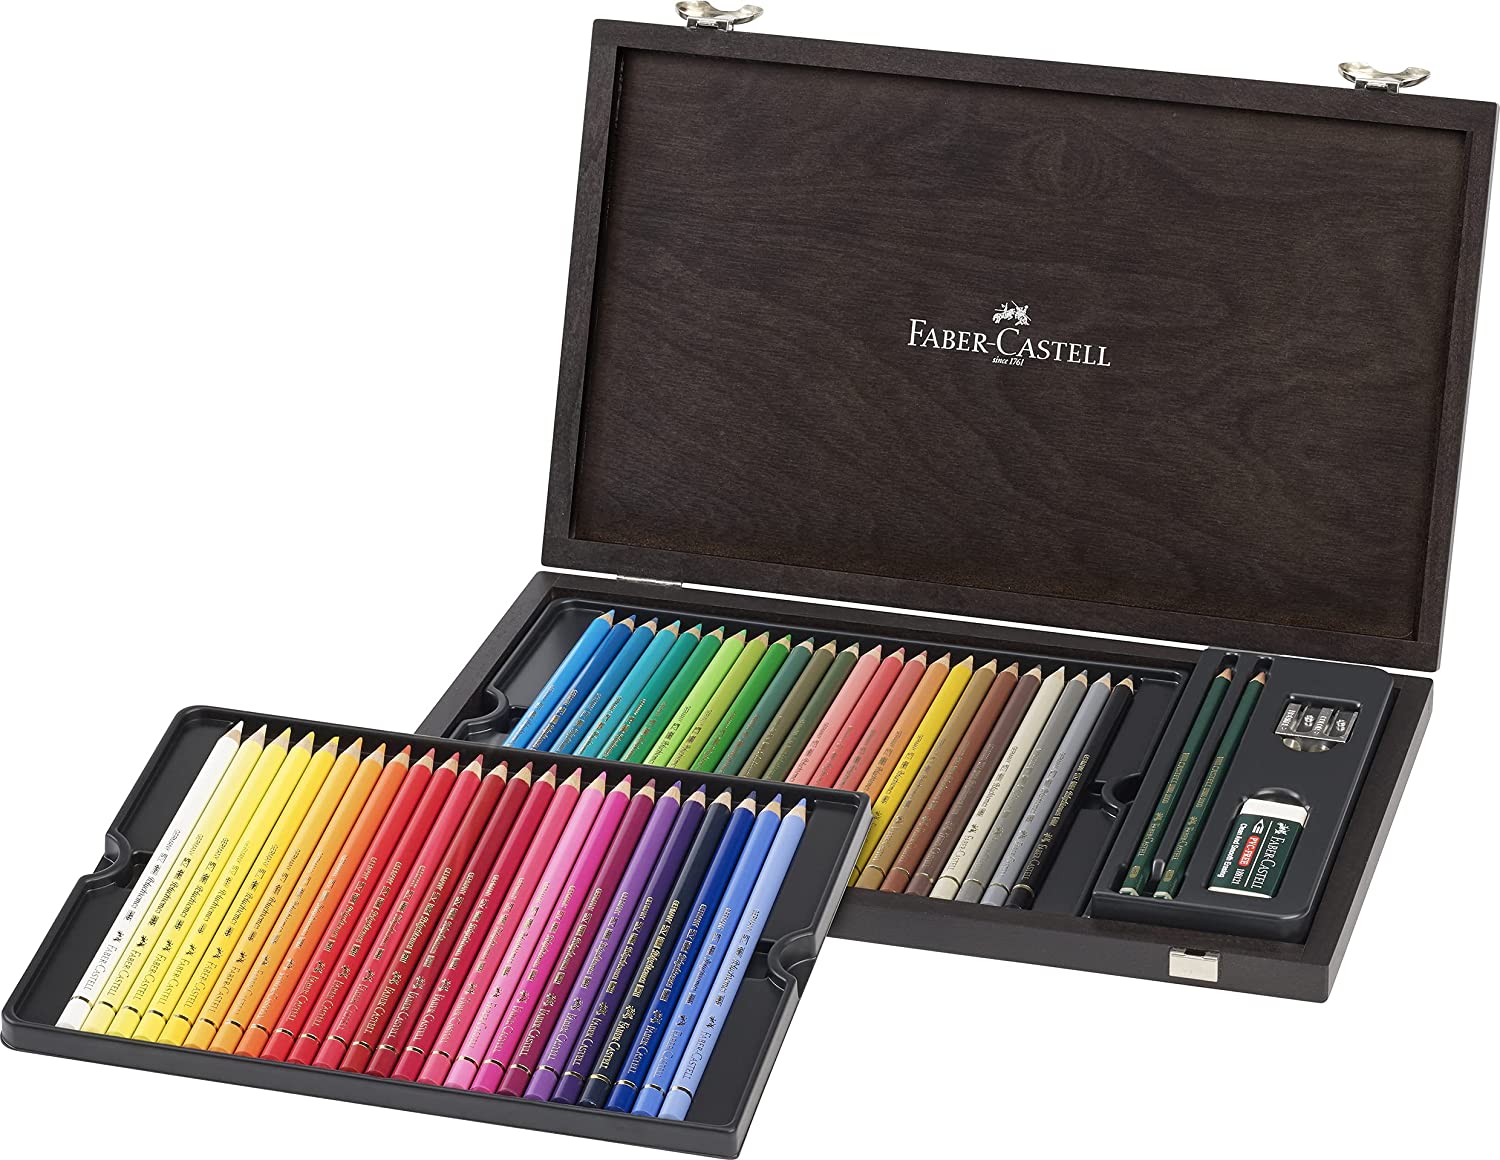 36 Faber-Castell Polychromos Colored Pencils: Unboxing and Color